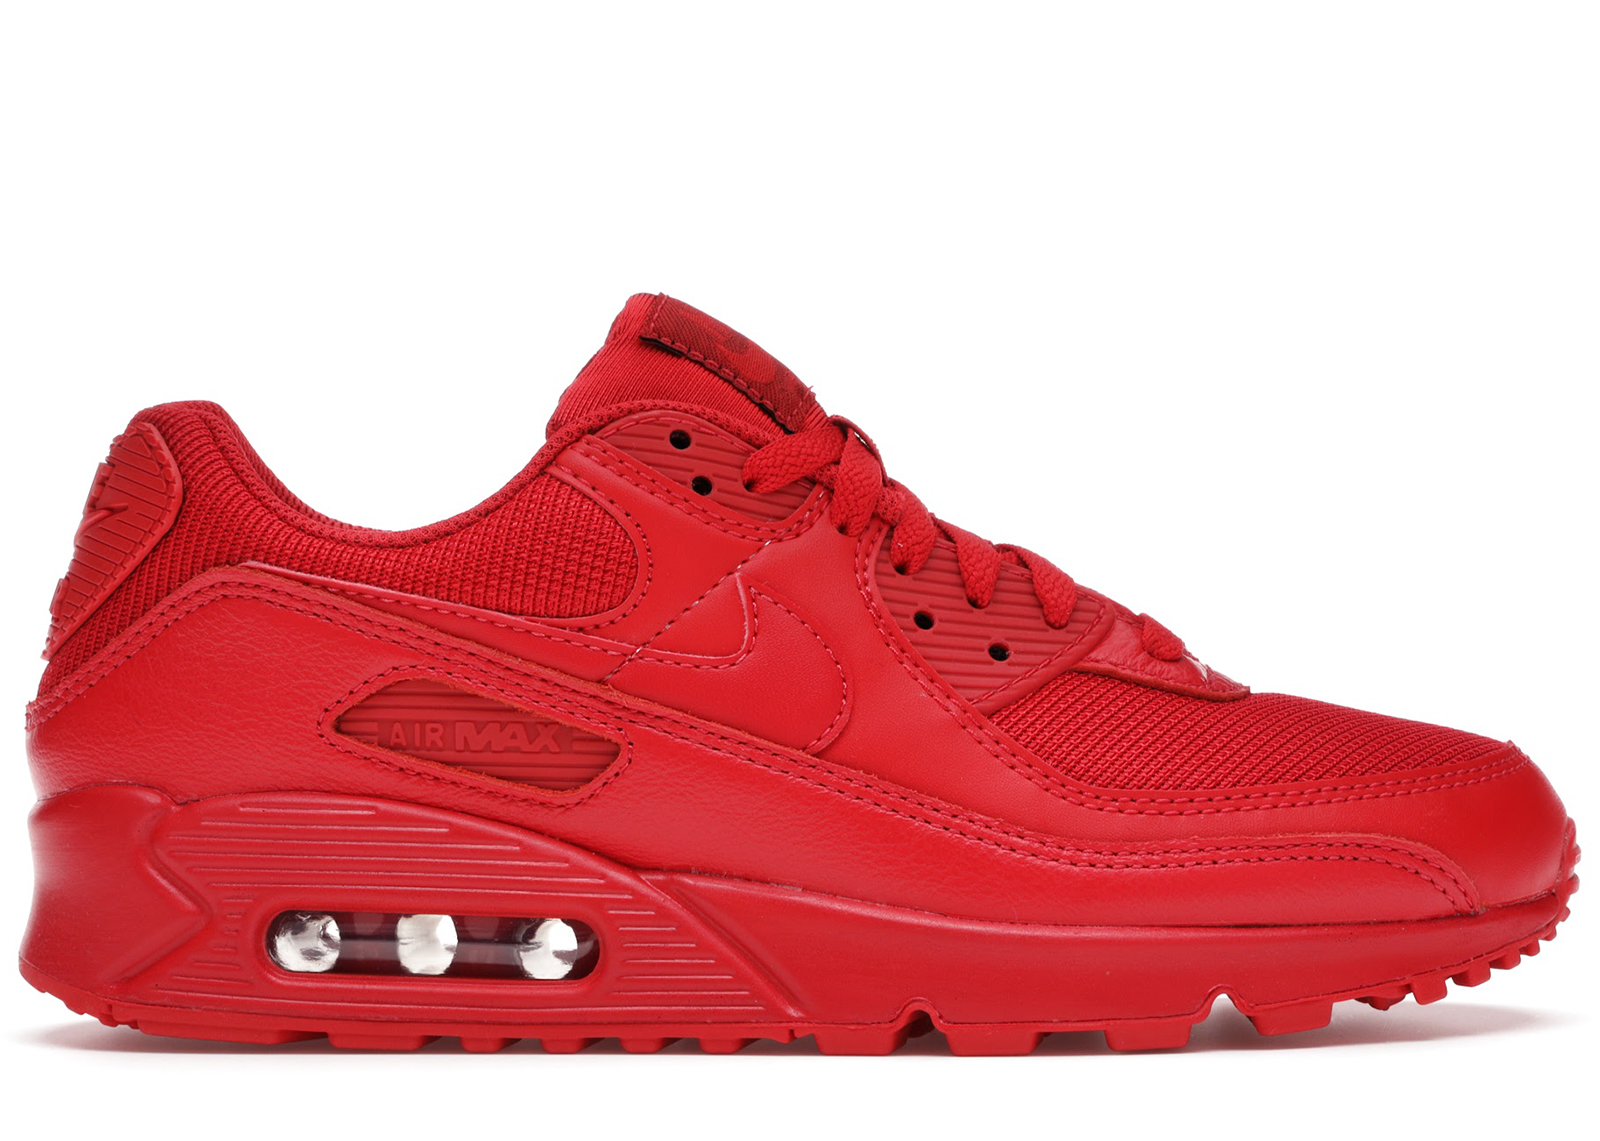 Buy Nike Air Max 90 Size 14 Shoes & New Sneakers - StockX